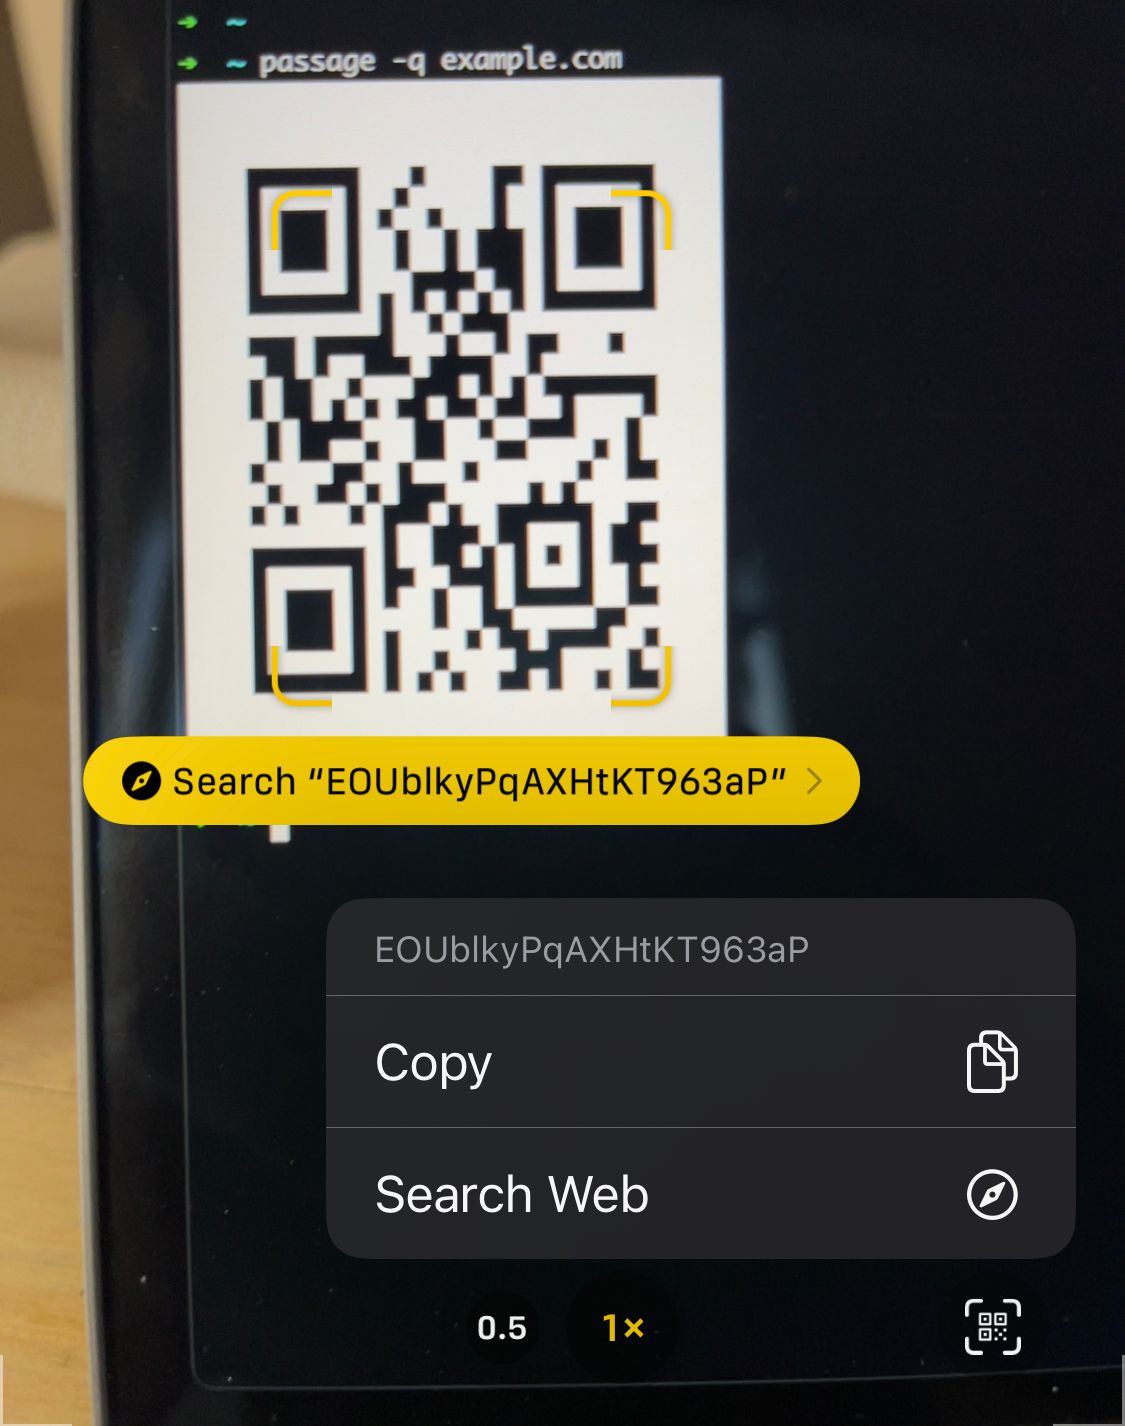 A screenshot of the iOS camera app scanning a QR code generated by passage